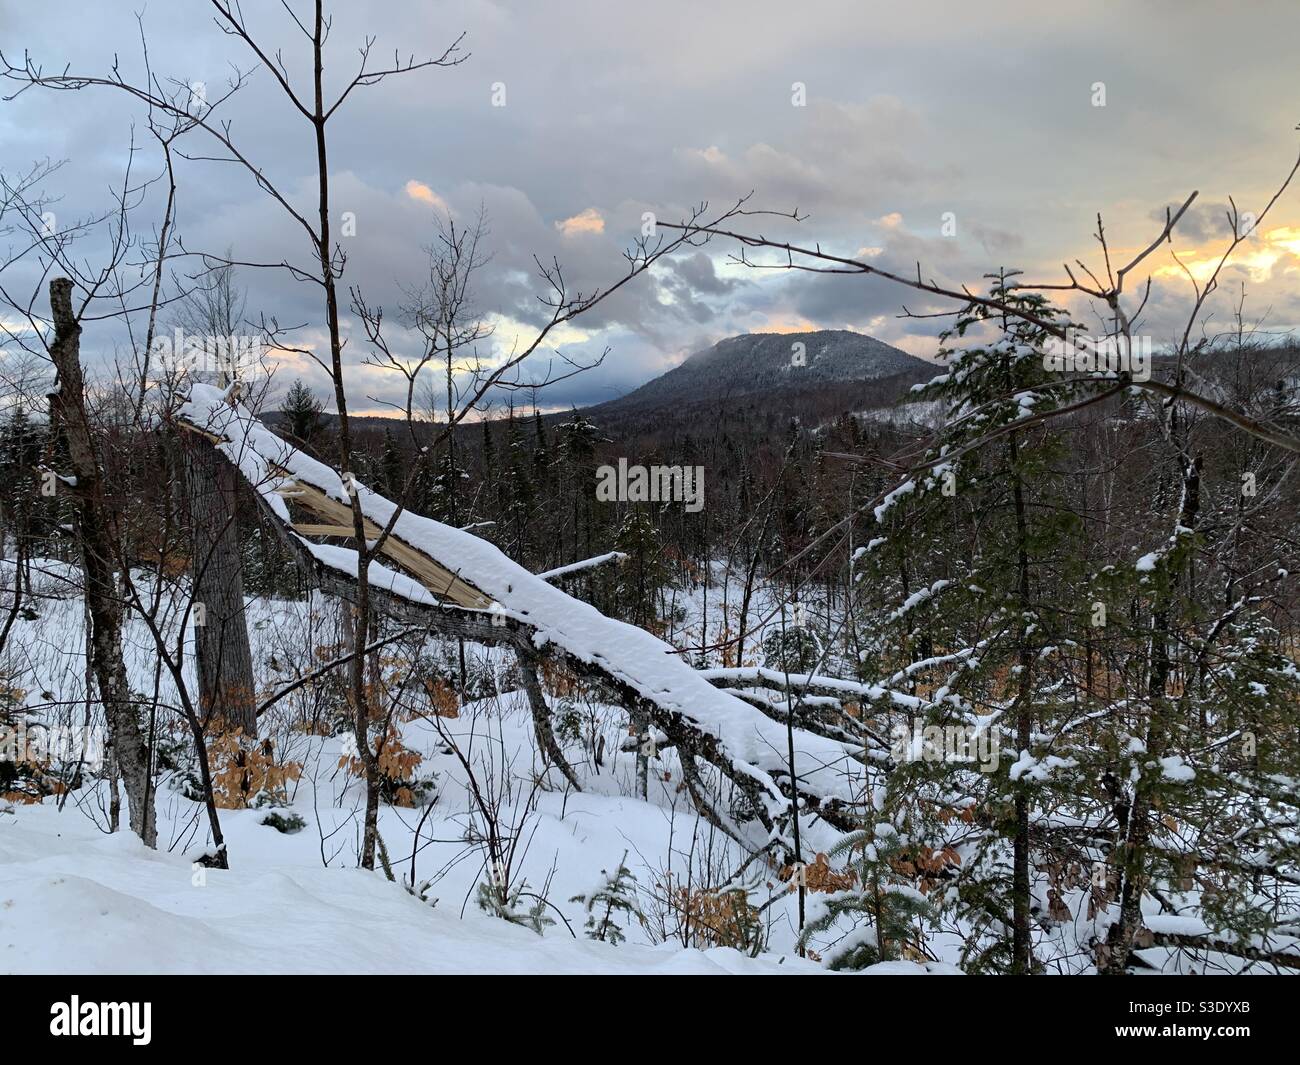 Broken tree in foreground lined with snow and Sugarloaf Mtn in the background framed by two overarching tree twigs against the evening sky, March 1, 2021 at 5:01 pm, Mt Chase, Maine, Grand Lake Road Stock Photo